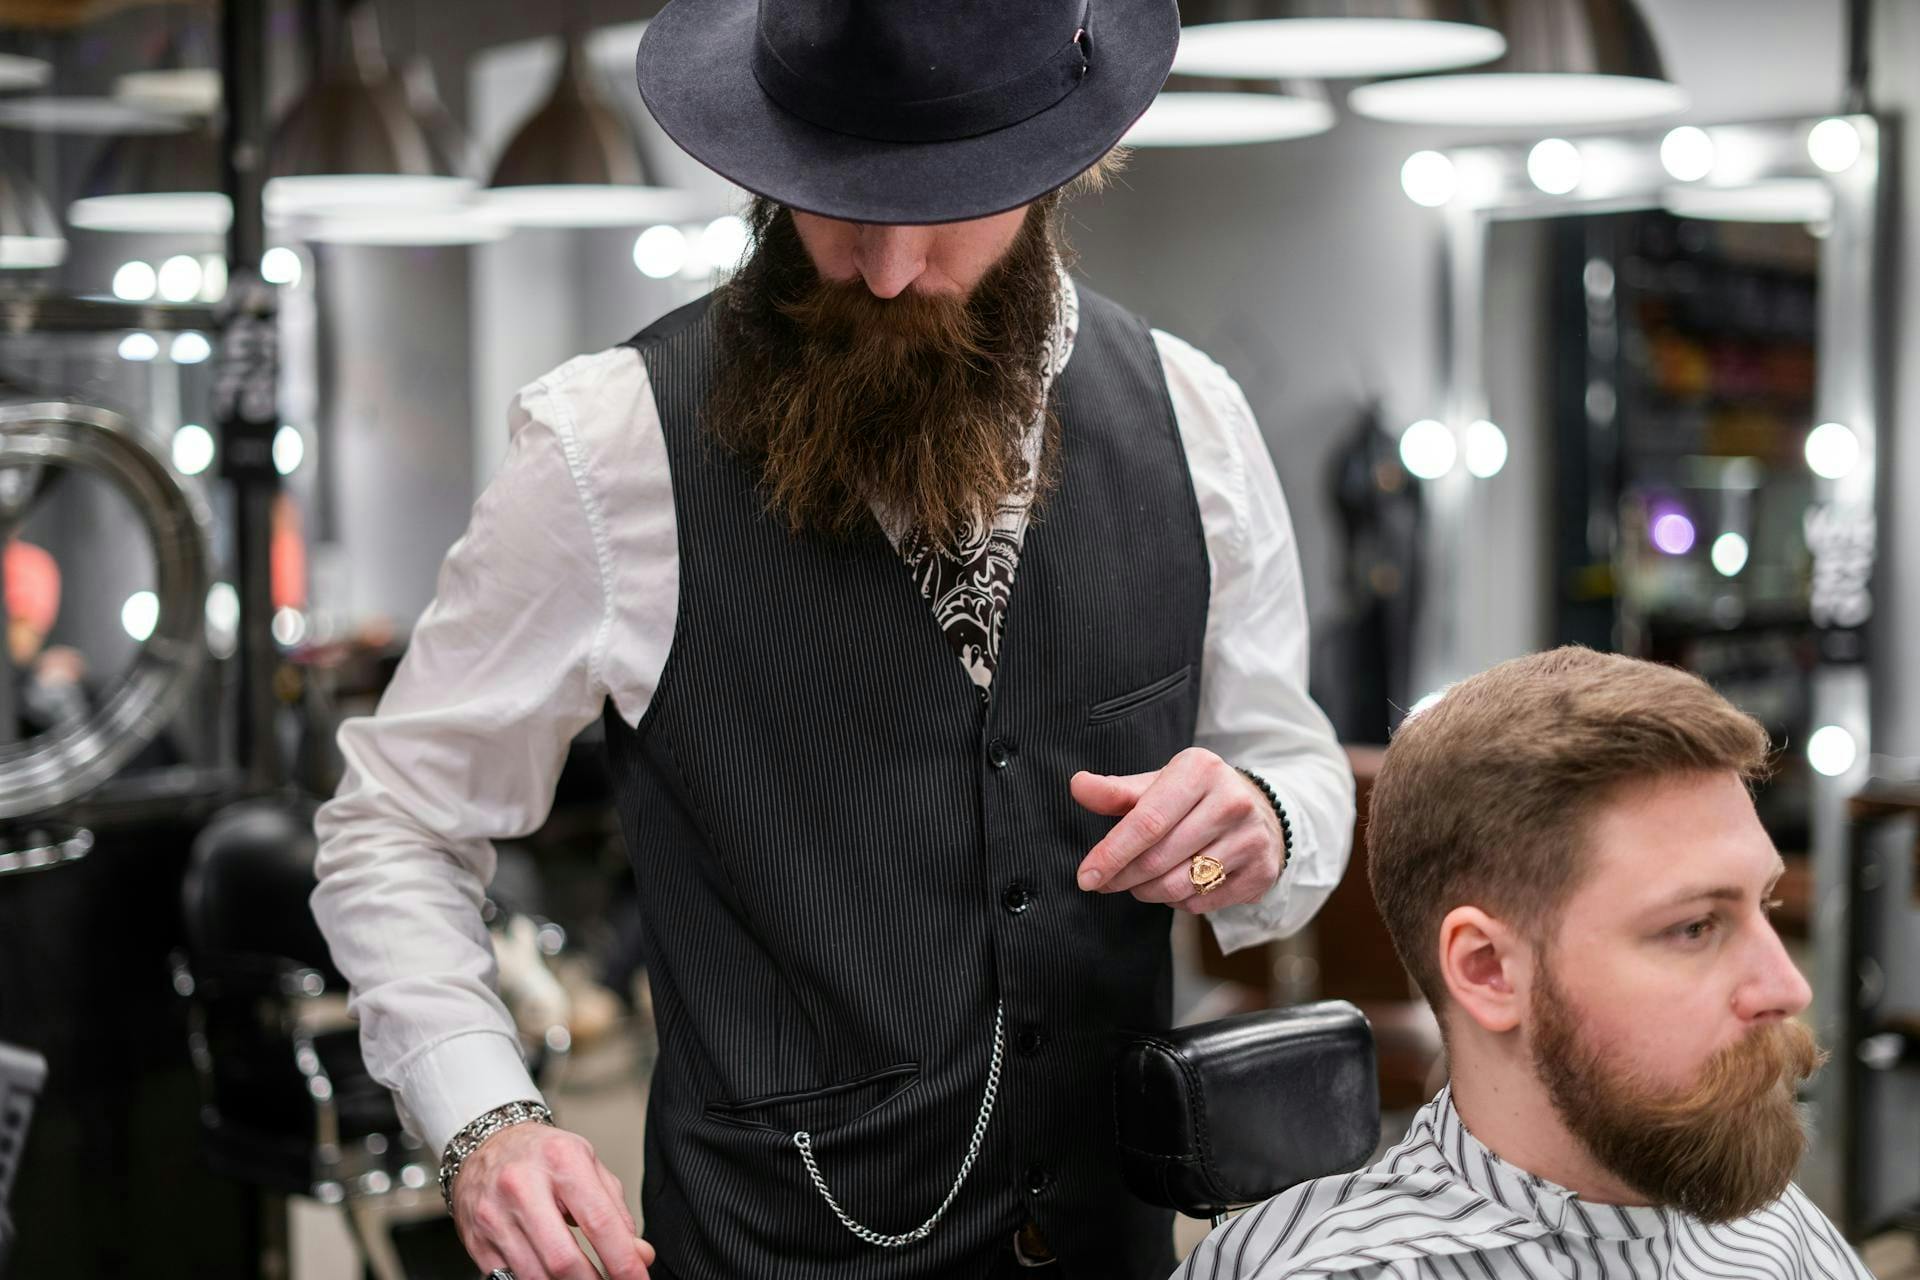 Focusing on Personal Growth as a Professional Barber